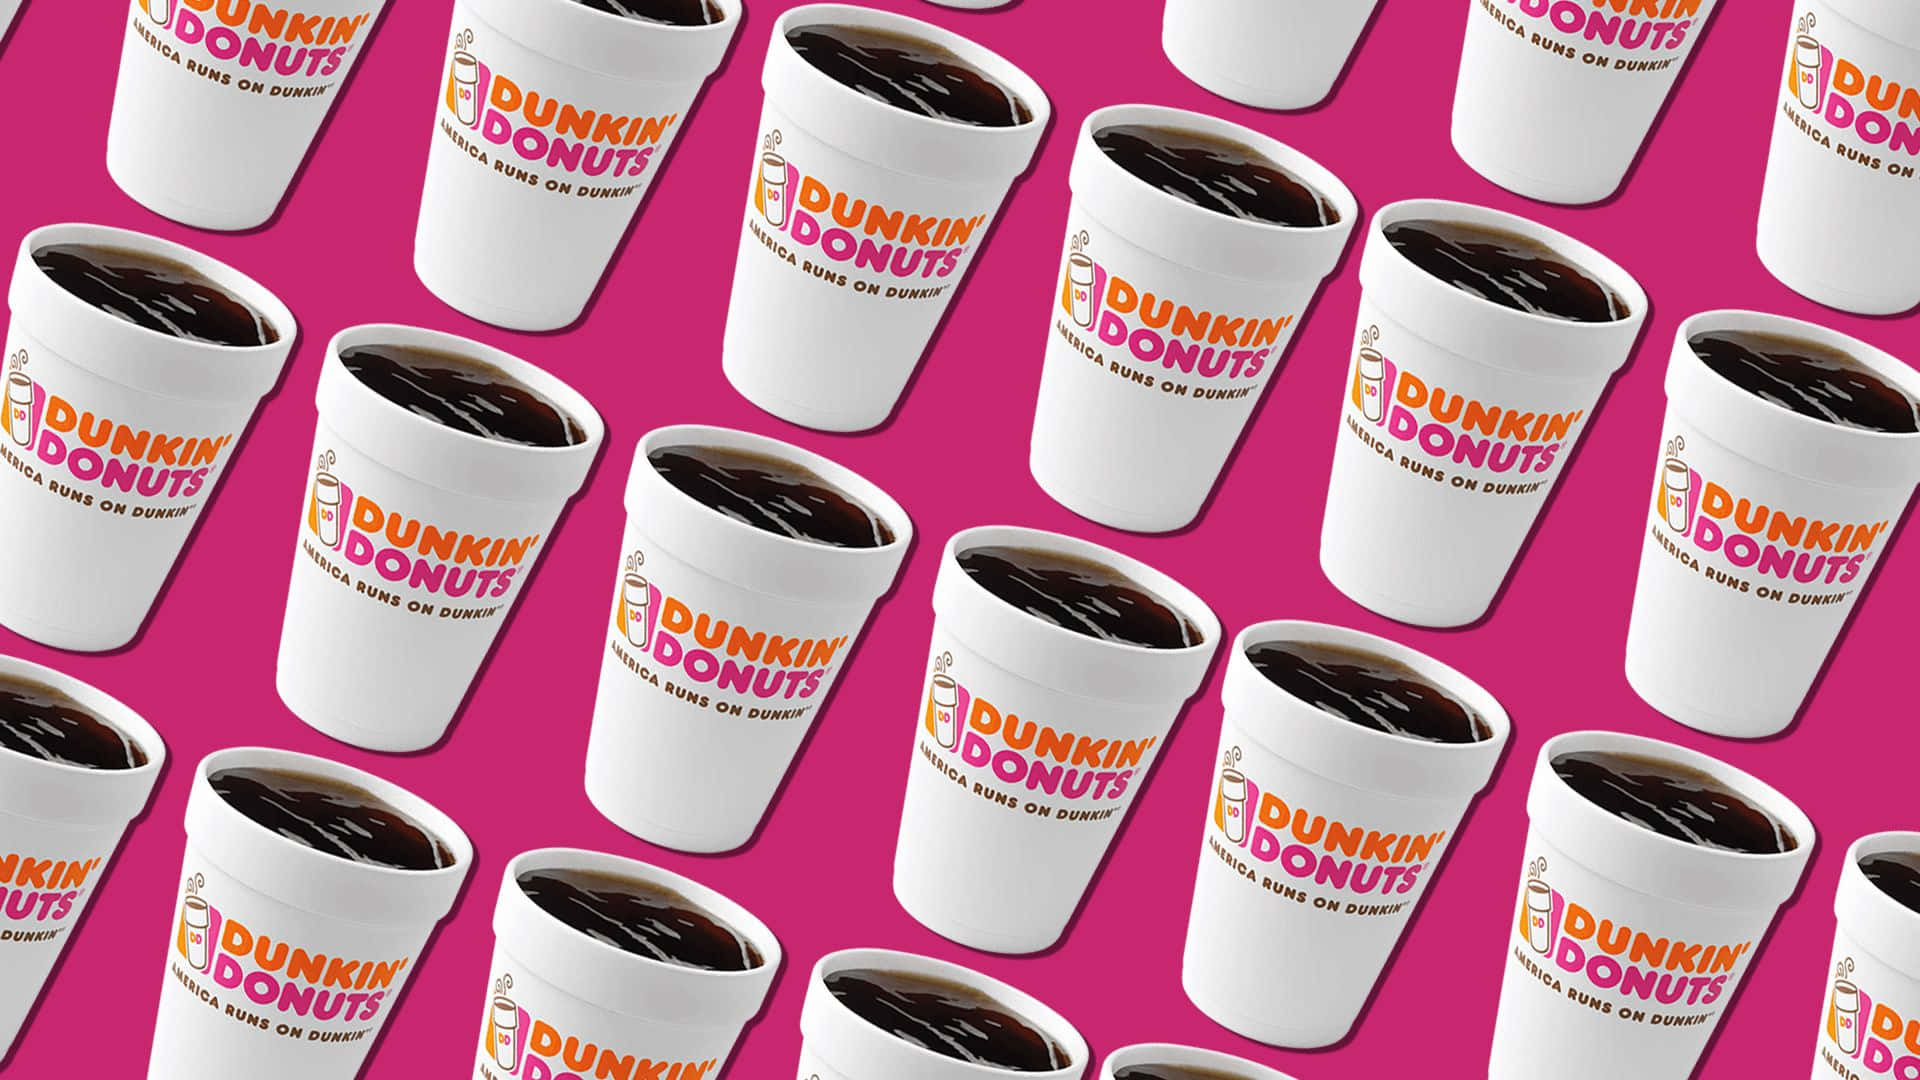 Get your caffeine fix and more at Dunkin Donuts!